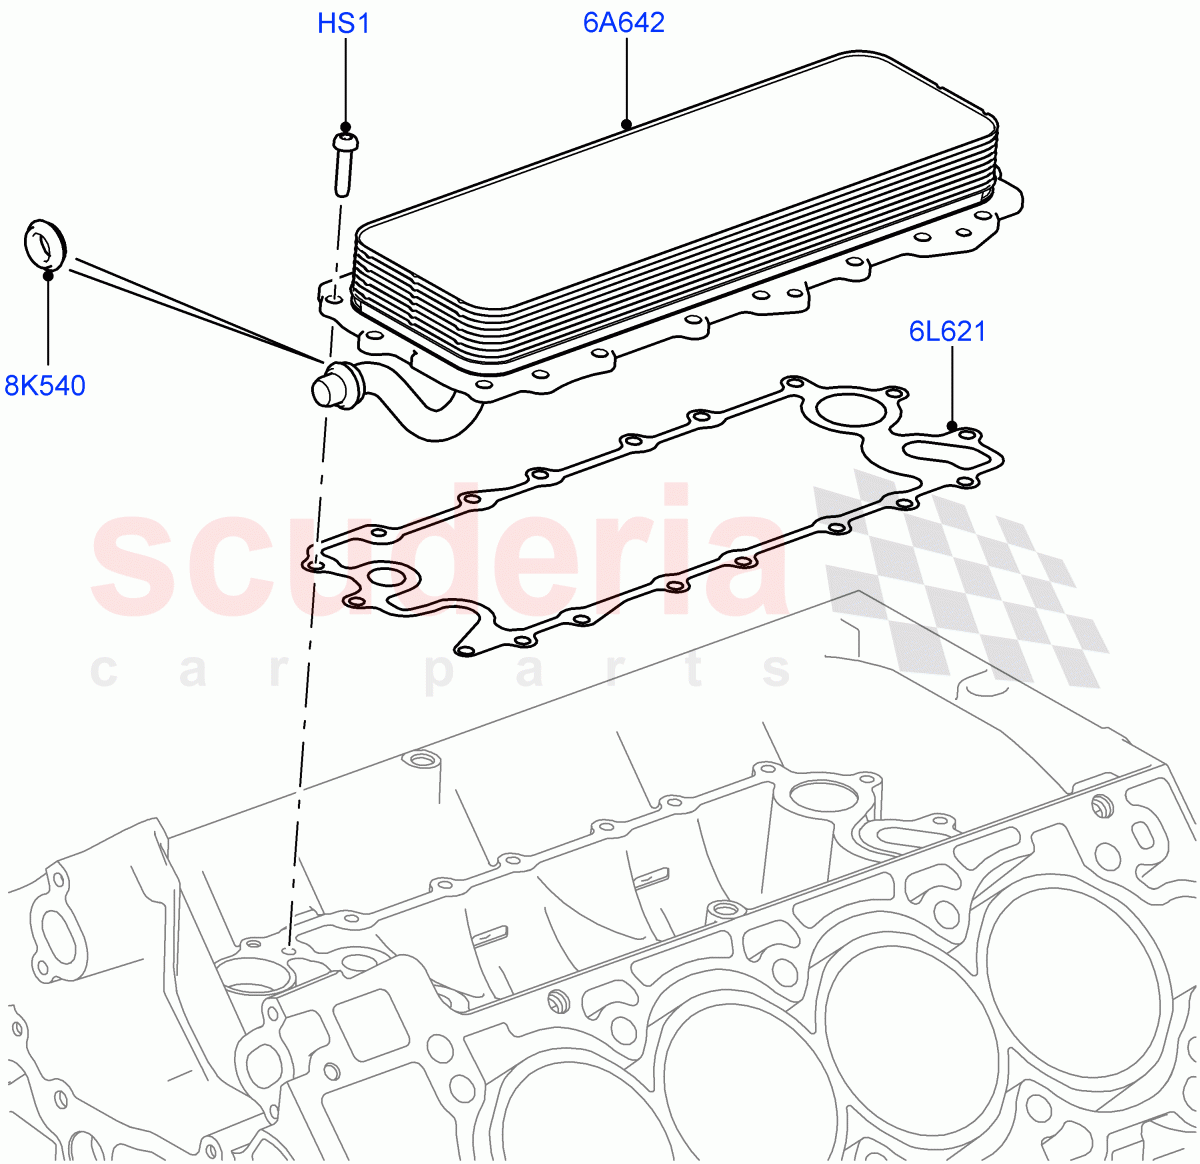 Oil Cooler And Filter(Oil Cooler)(5.0L OHC SGDI SC V8 Petrol - AJ133,5.0 Petrol AJ133 DOHC CDA,5.0L P AJ133 DOHC CDA S/C Enhanced)((V)FROMAA000001) of Land Rover Land Rover Range Rover (2010-2012) [5.0 OHC SGDI SC V8 Petrol]